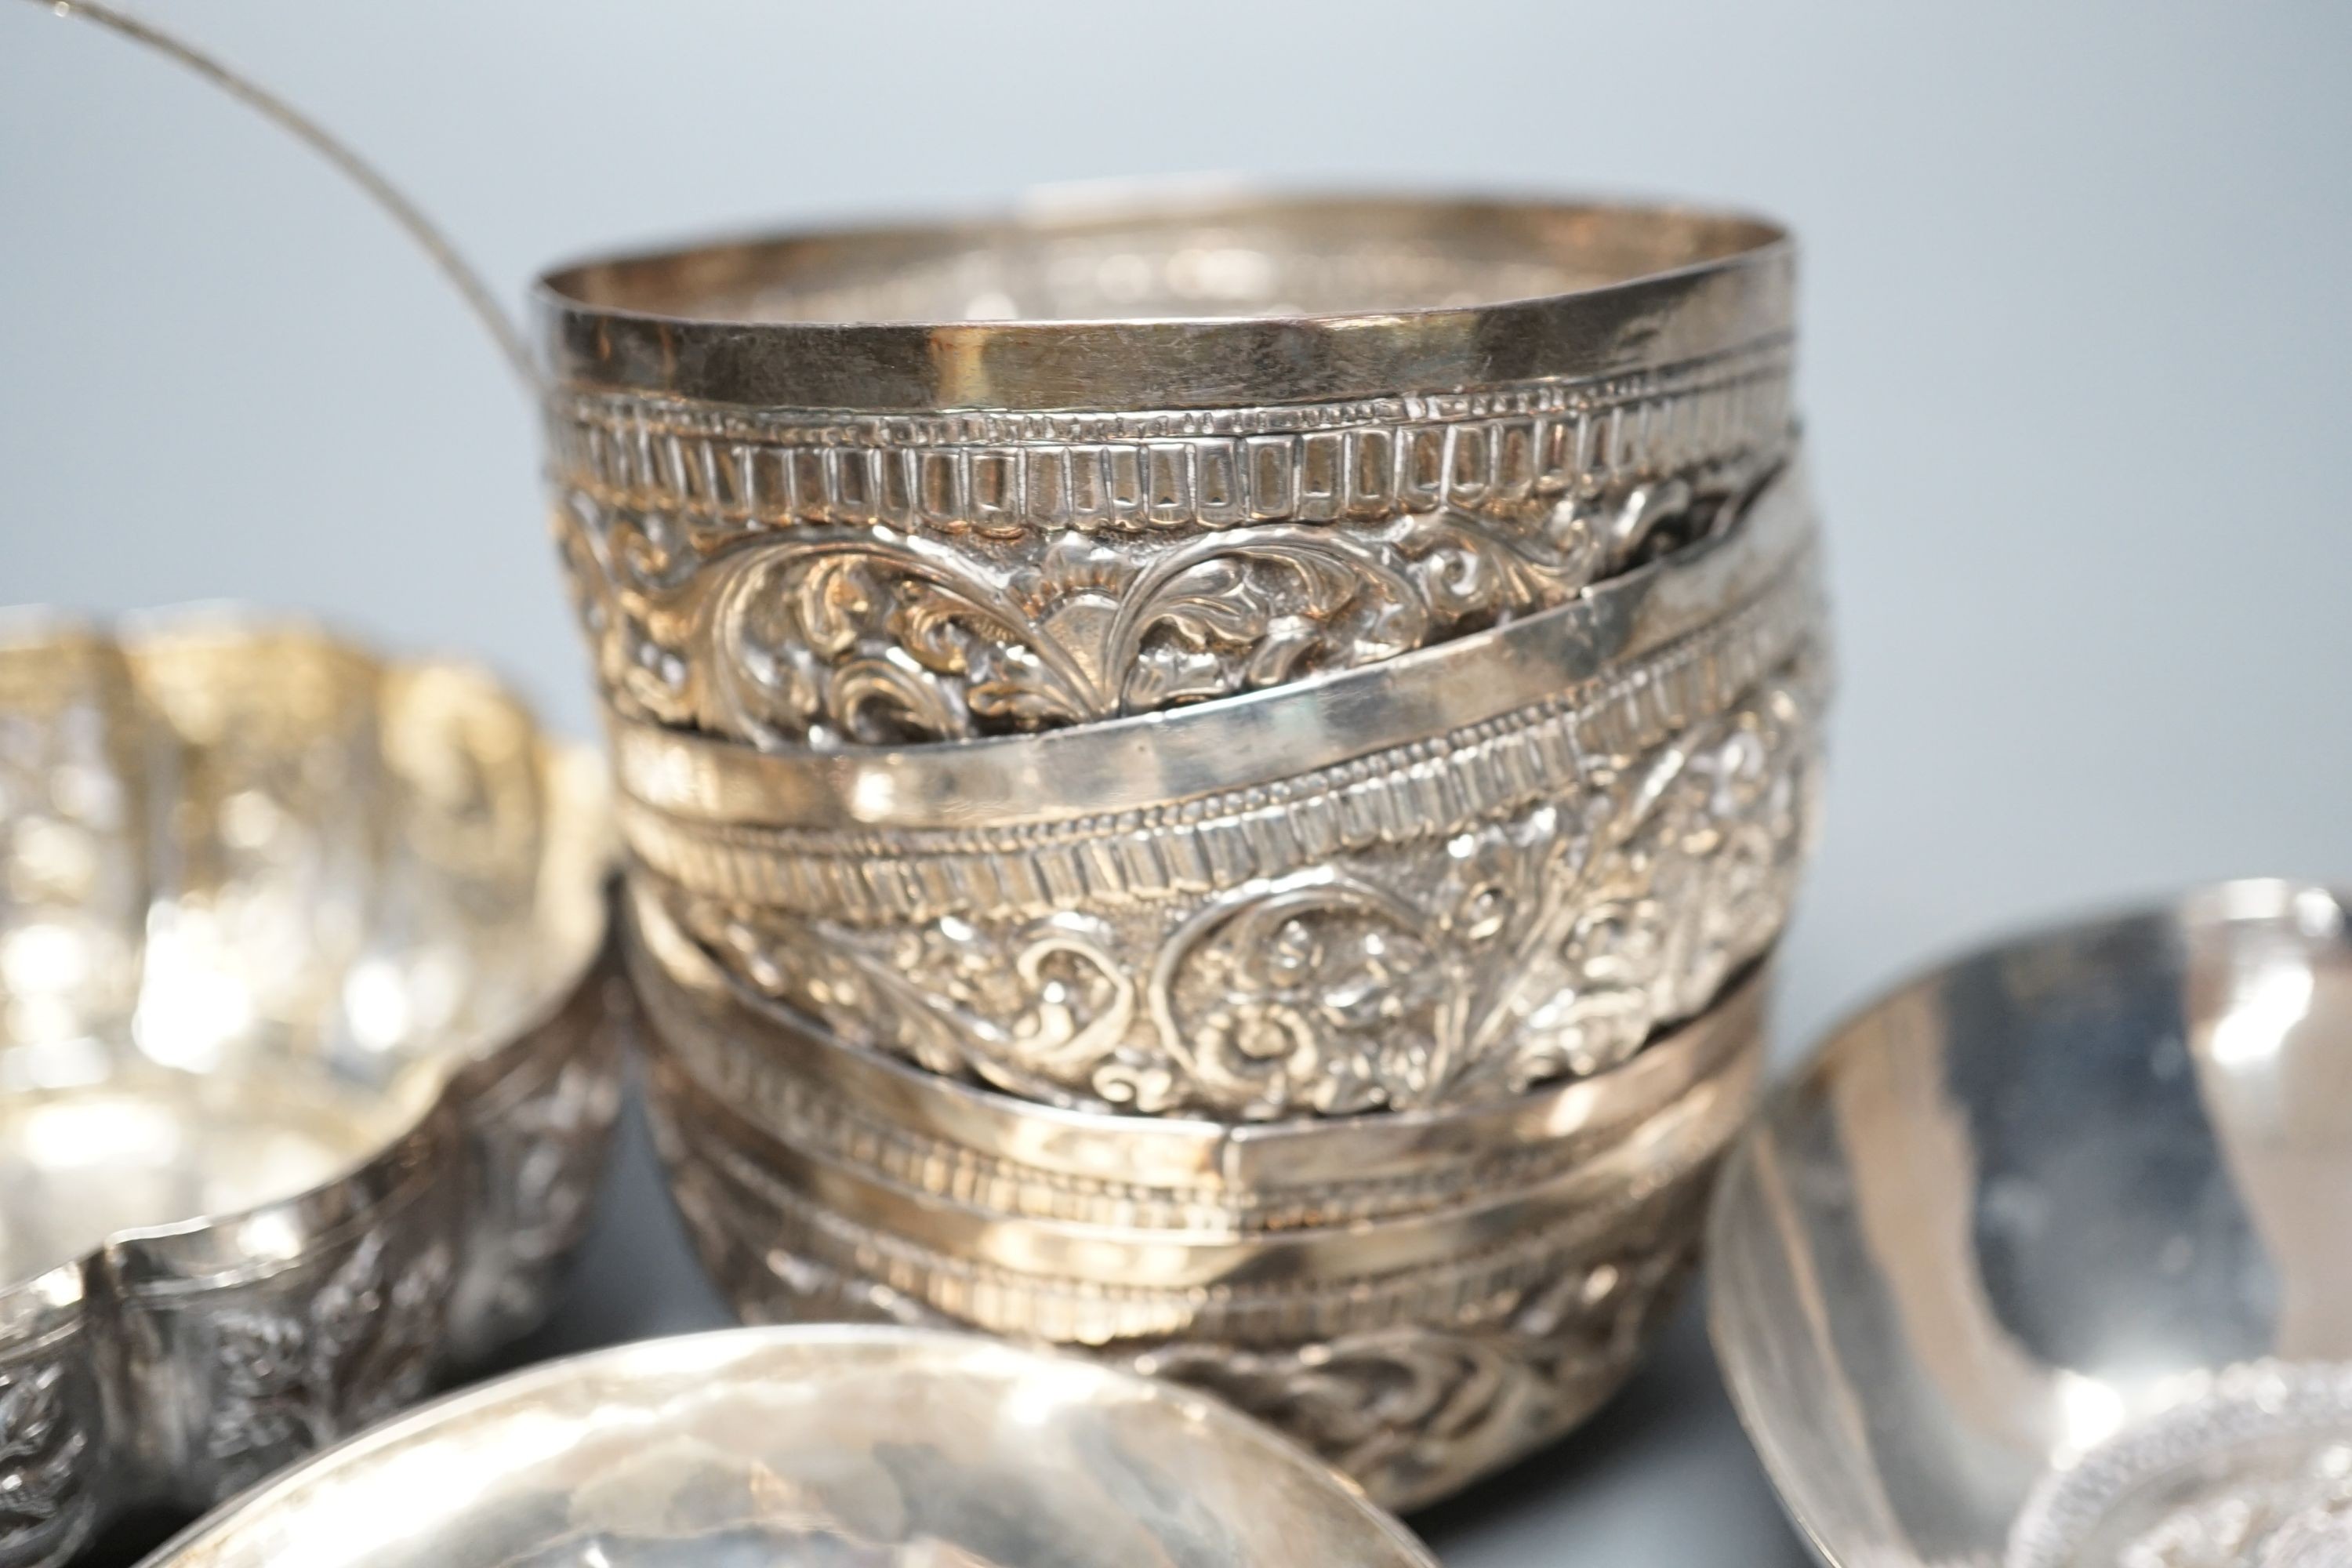 Four small Rangoon white metal bowls together with a simile basket and six small white metal bowls with heraldic motifs, gross 24.5oz.